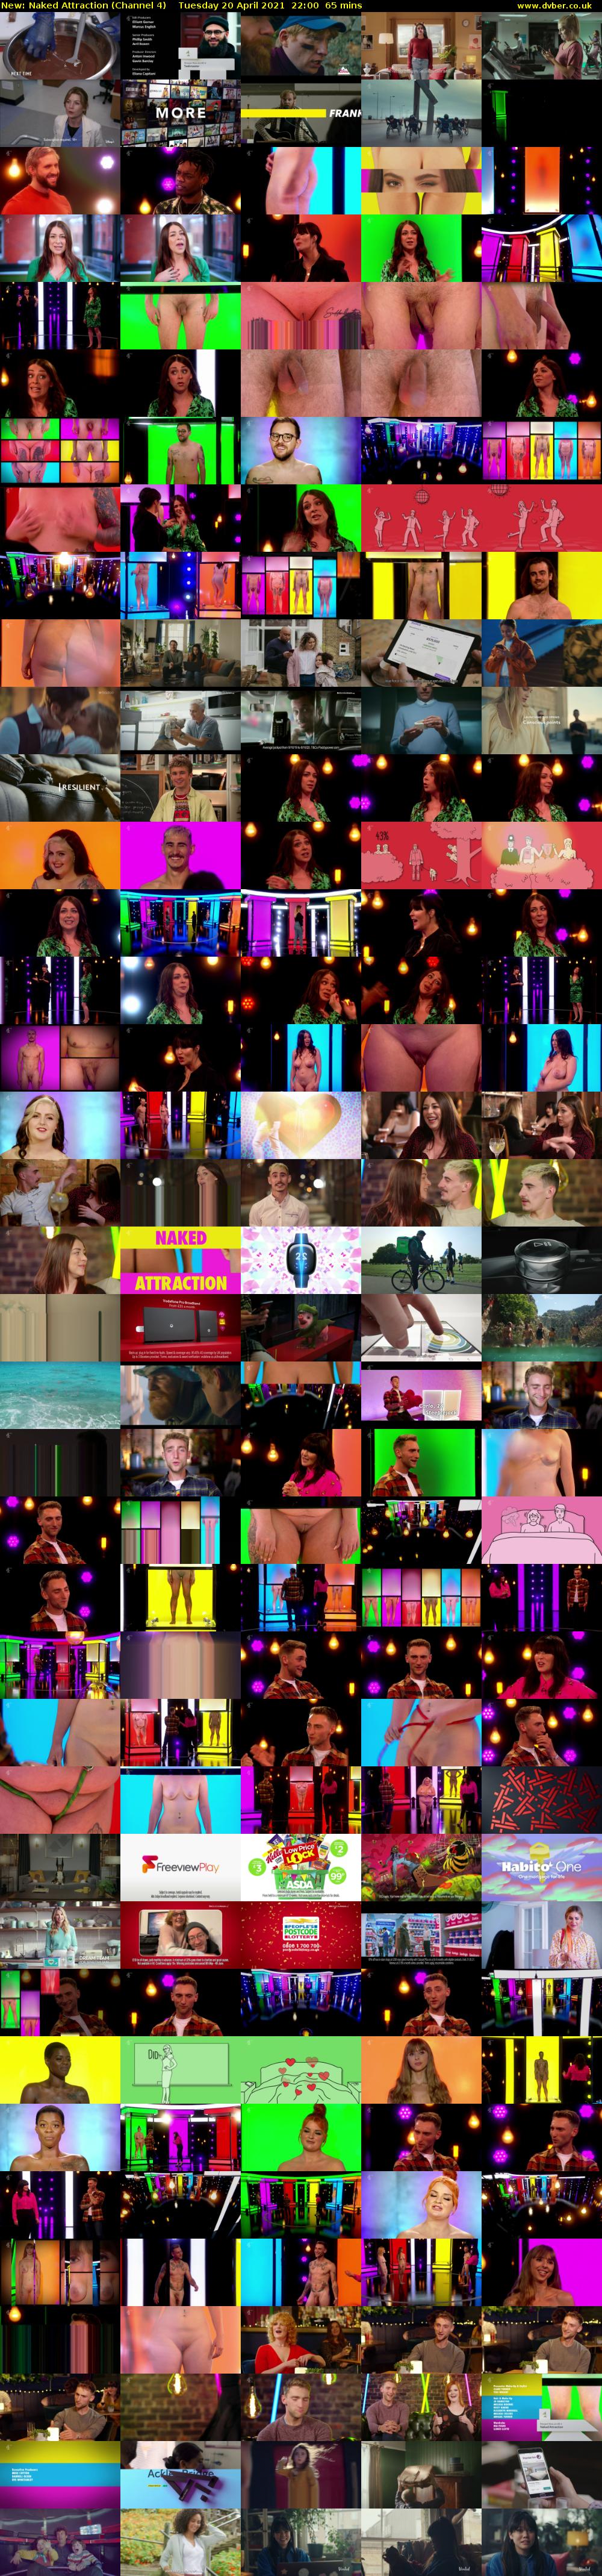 Naked Attraction (Channel 4) Tuesday 20 April 2021 22:00 - 23:05